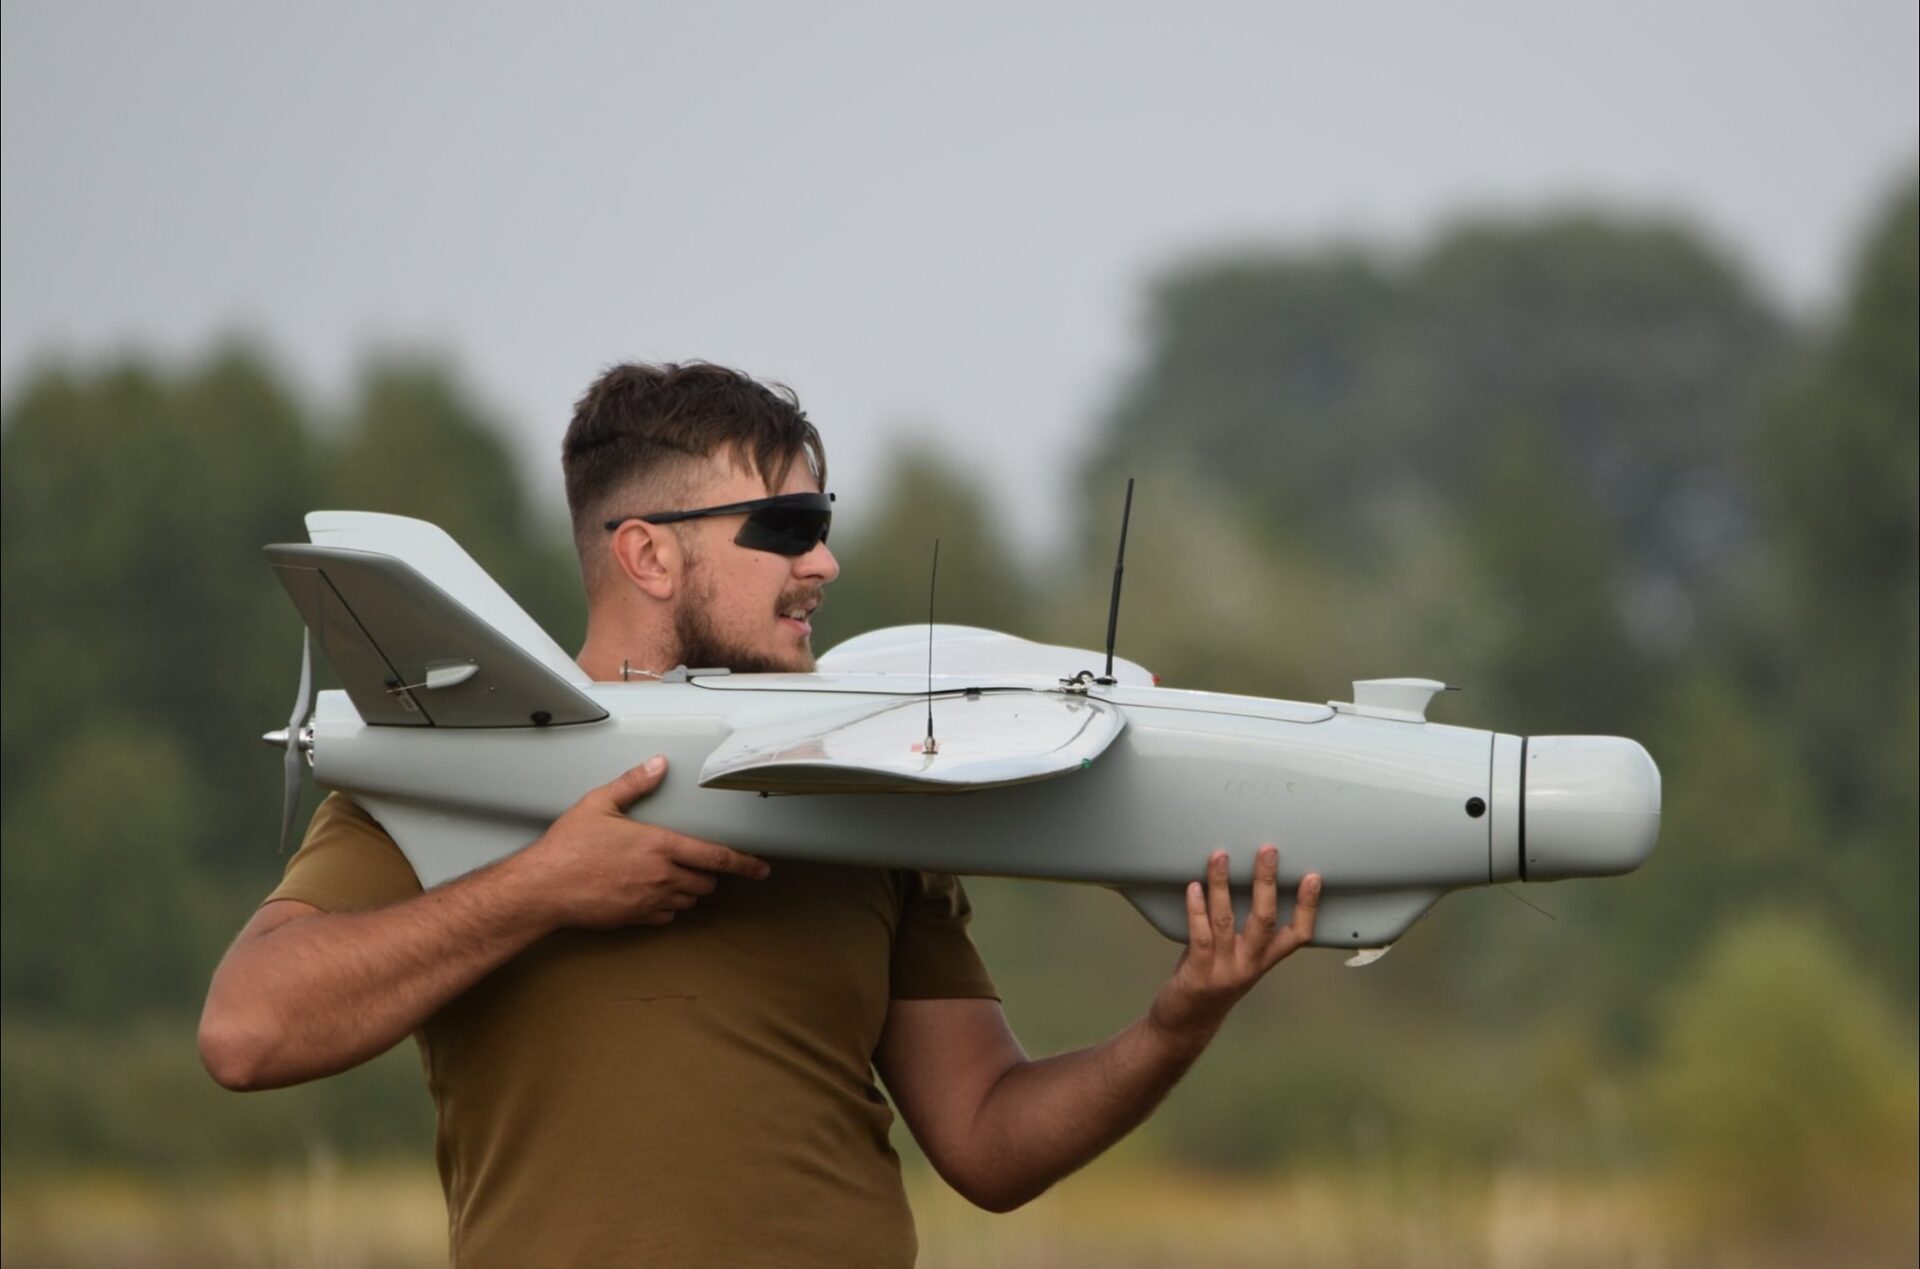 Ukrainian military adopts new Leleka-100 unmanned aerial system